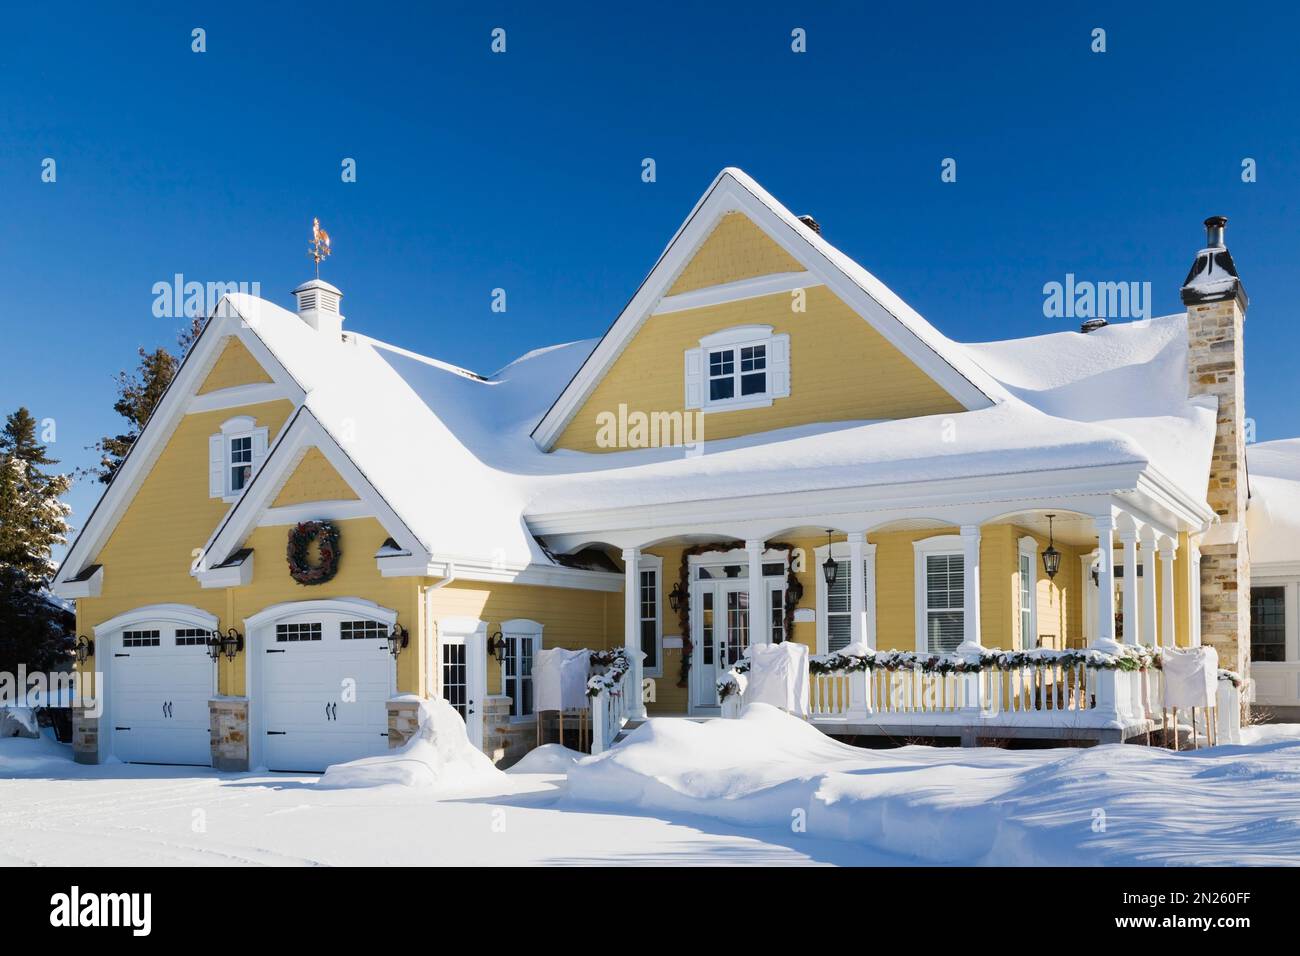 Yellow with white trim country cottage style house with Christmas decorations in winter. Stock Photo